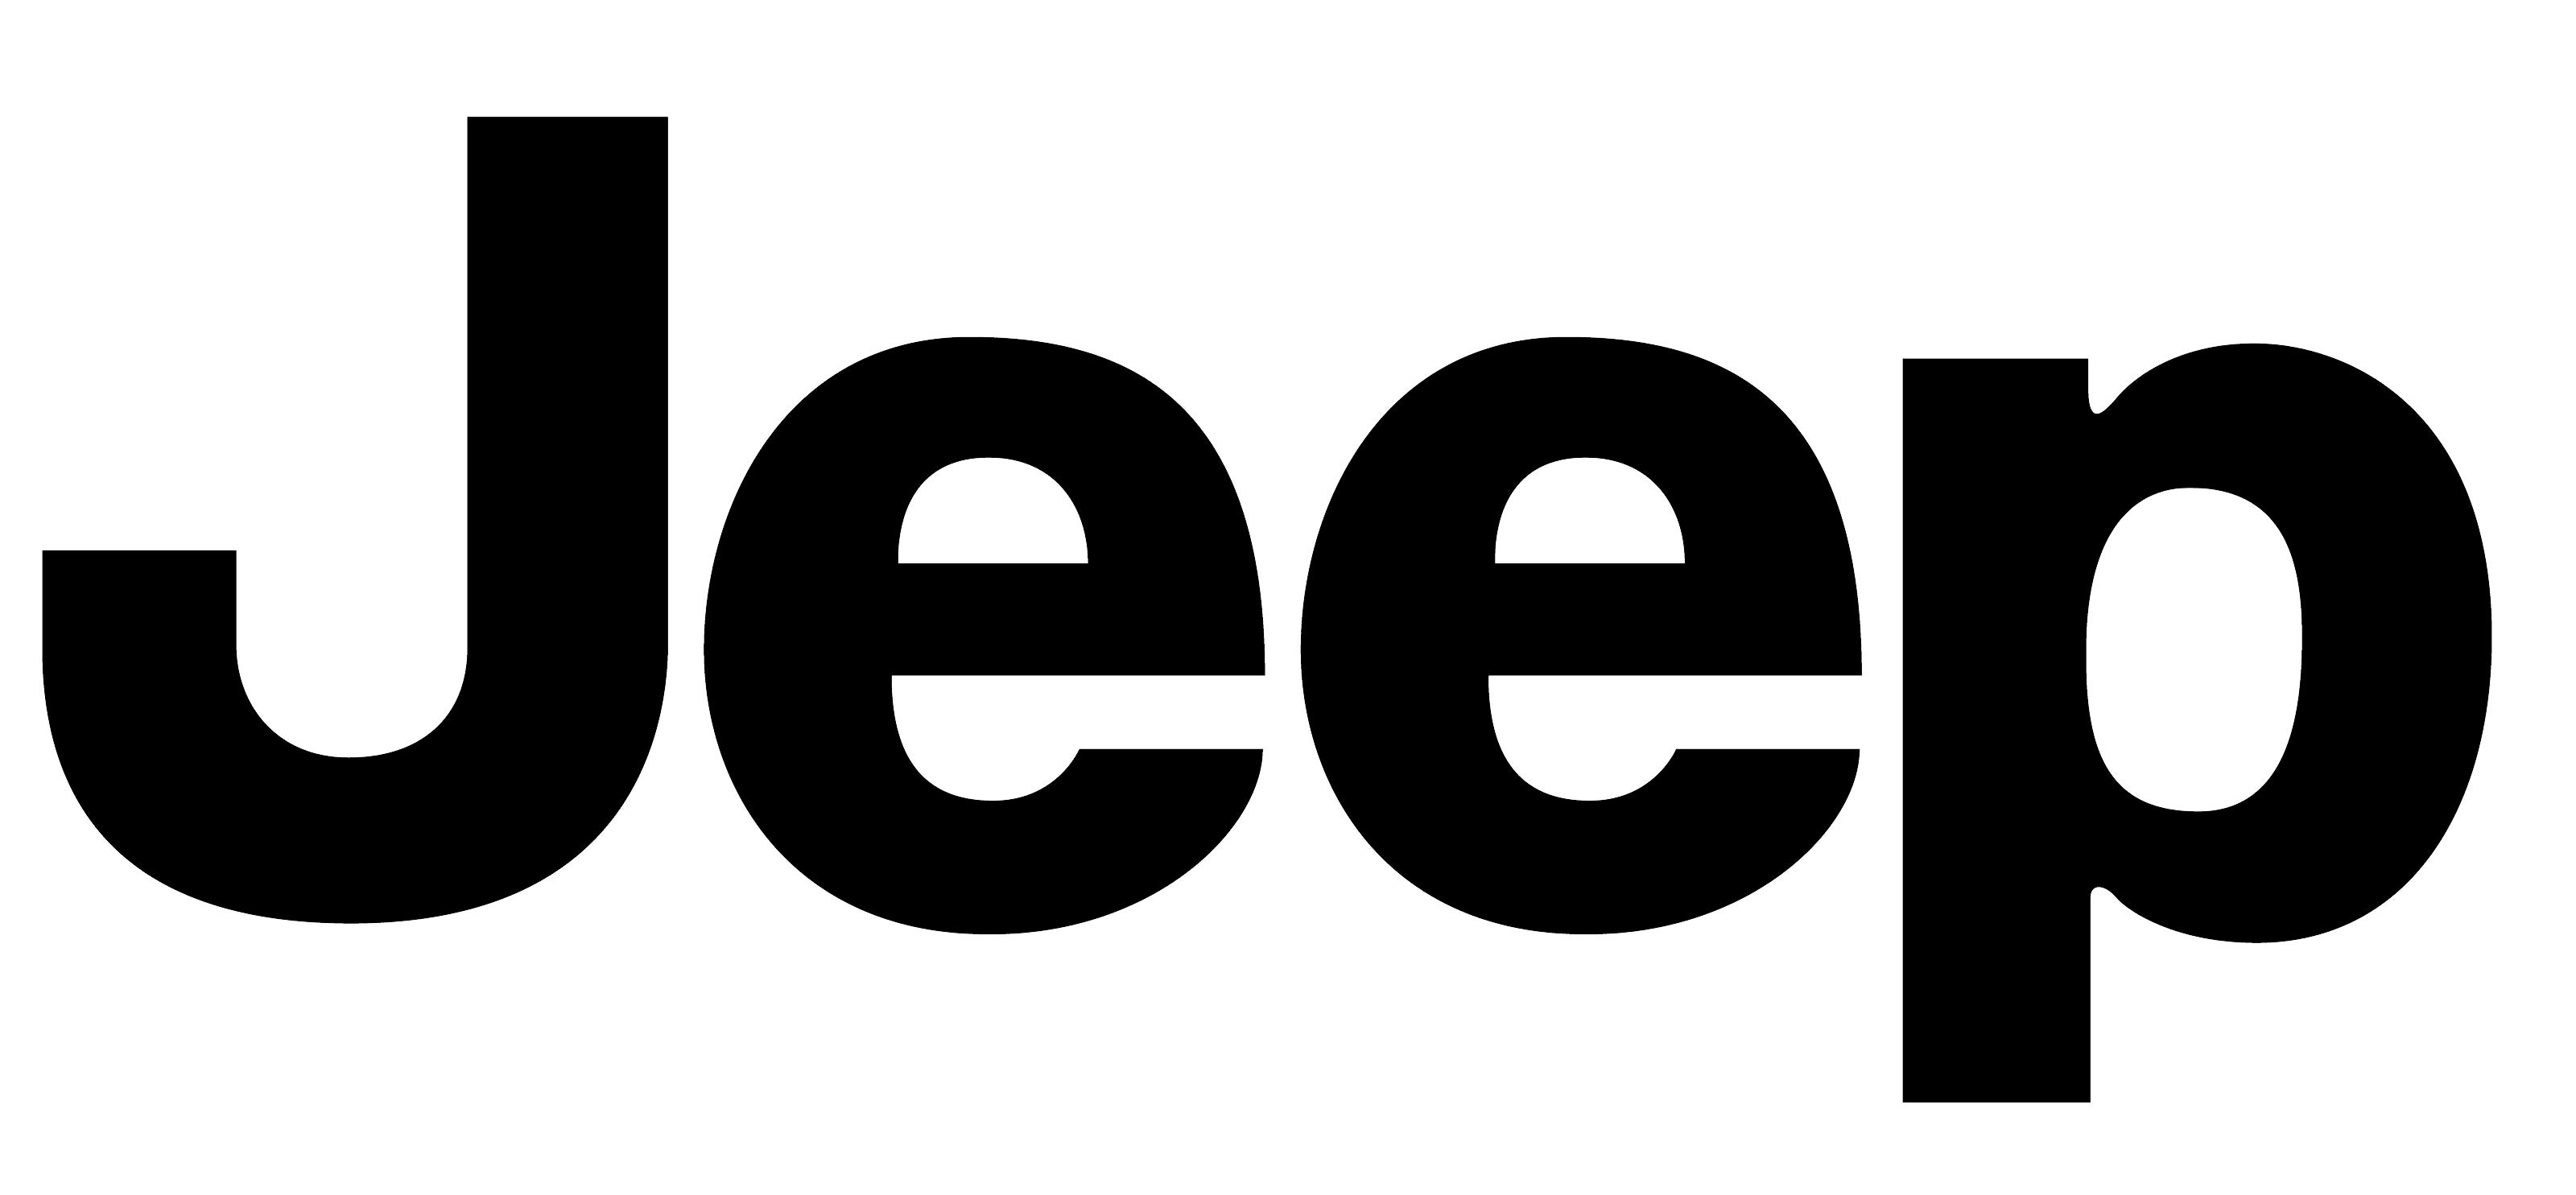 Jeep_logo.png